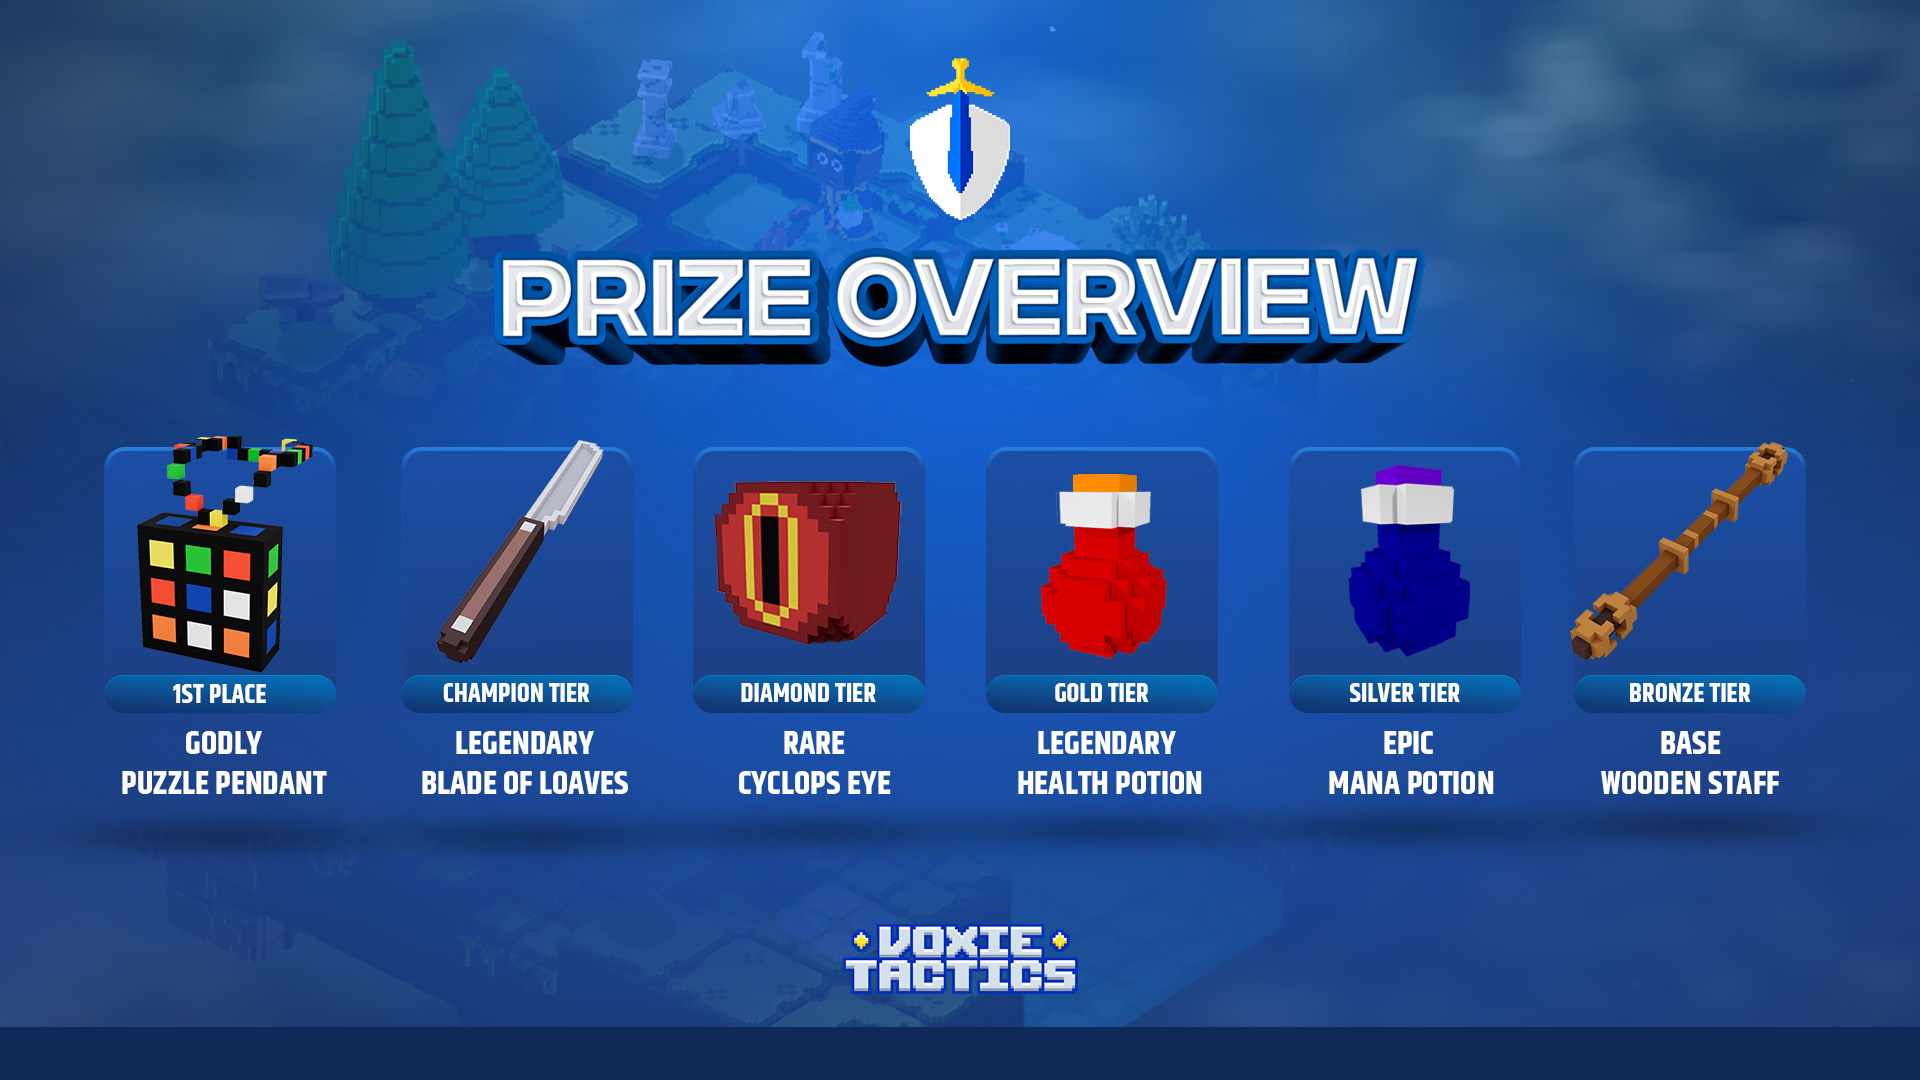 Voxie Tactics - some of the prizes for the pre-season